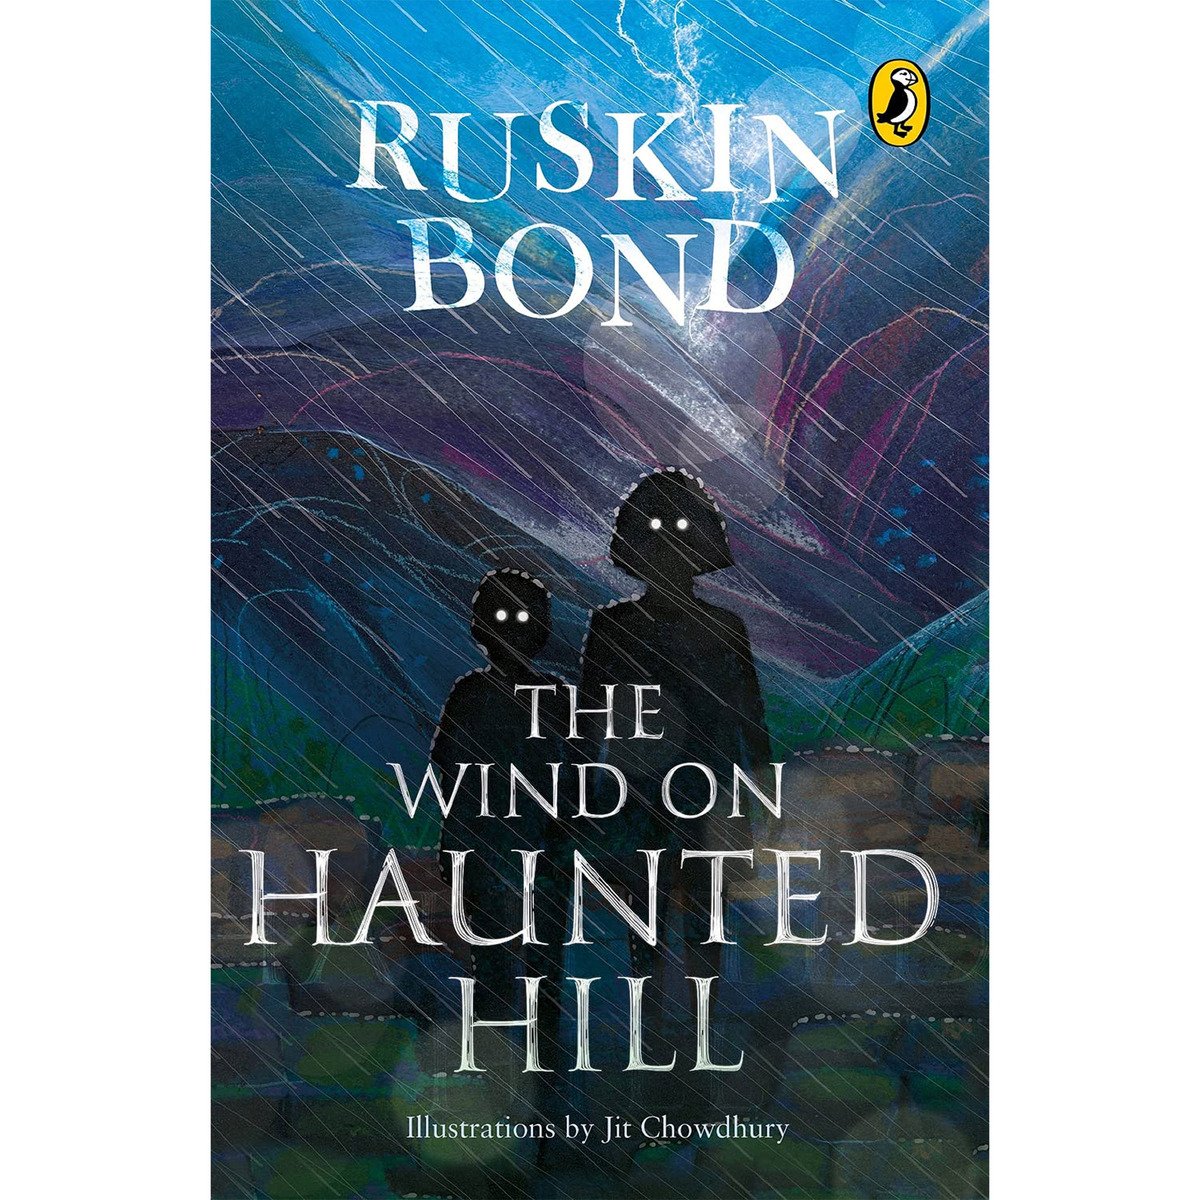 The Wind On Haunted Hill